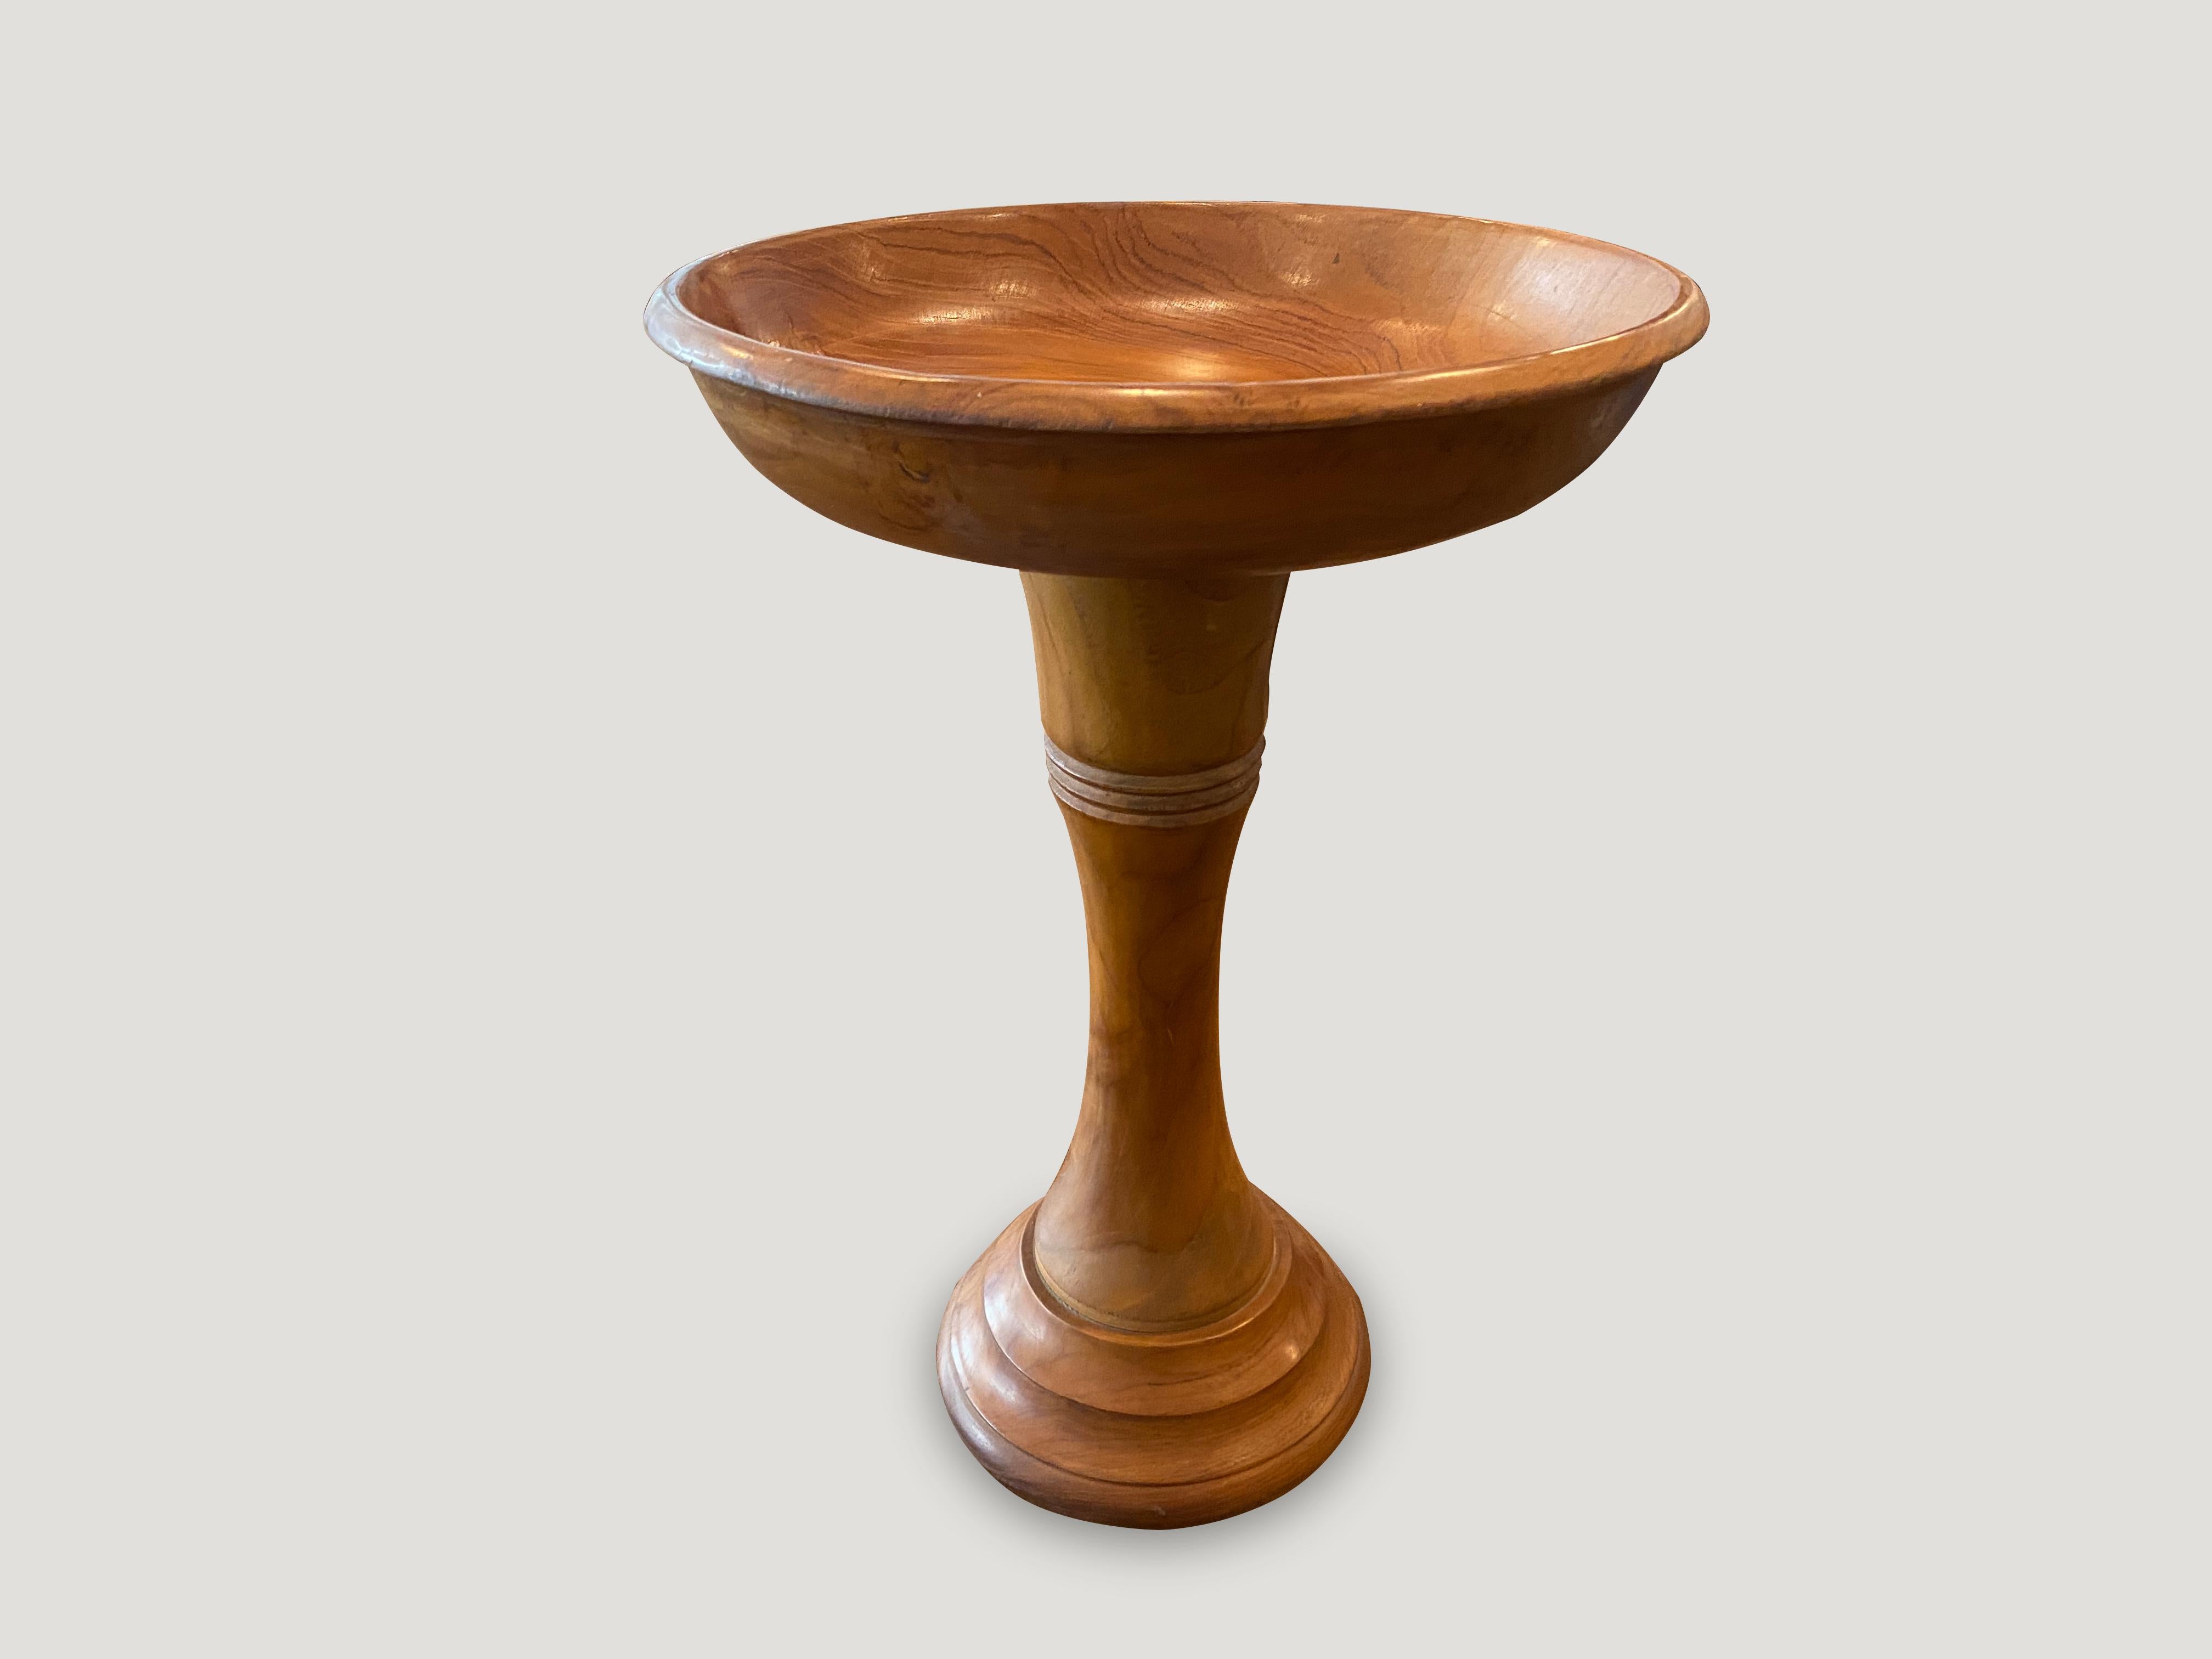 Andrianna Shamaris Teak Wood Offering Tray In Excellent Condition For Sale In New York, NY